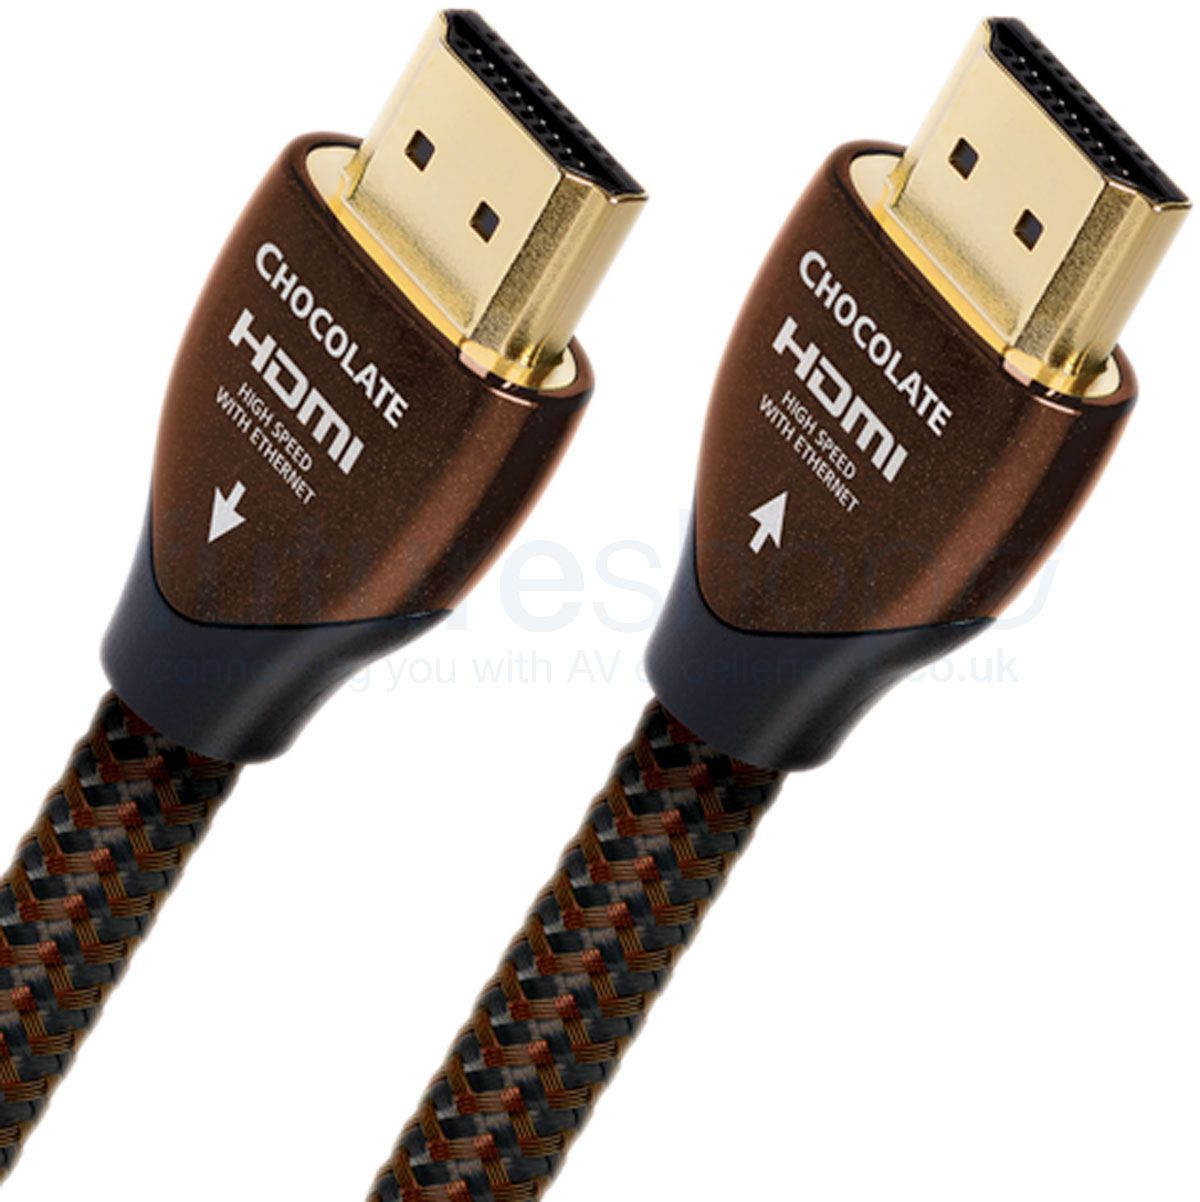 HDMI cable Supra High Speed HDMI cable, 12m - PS Auction - We